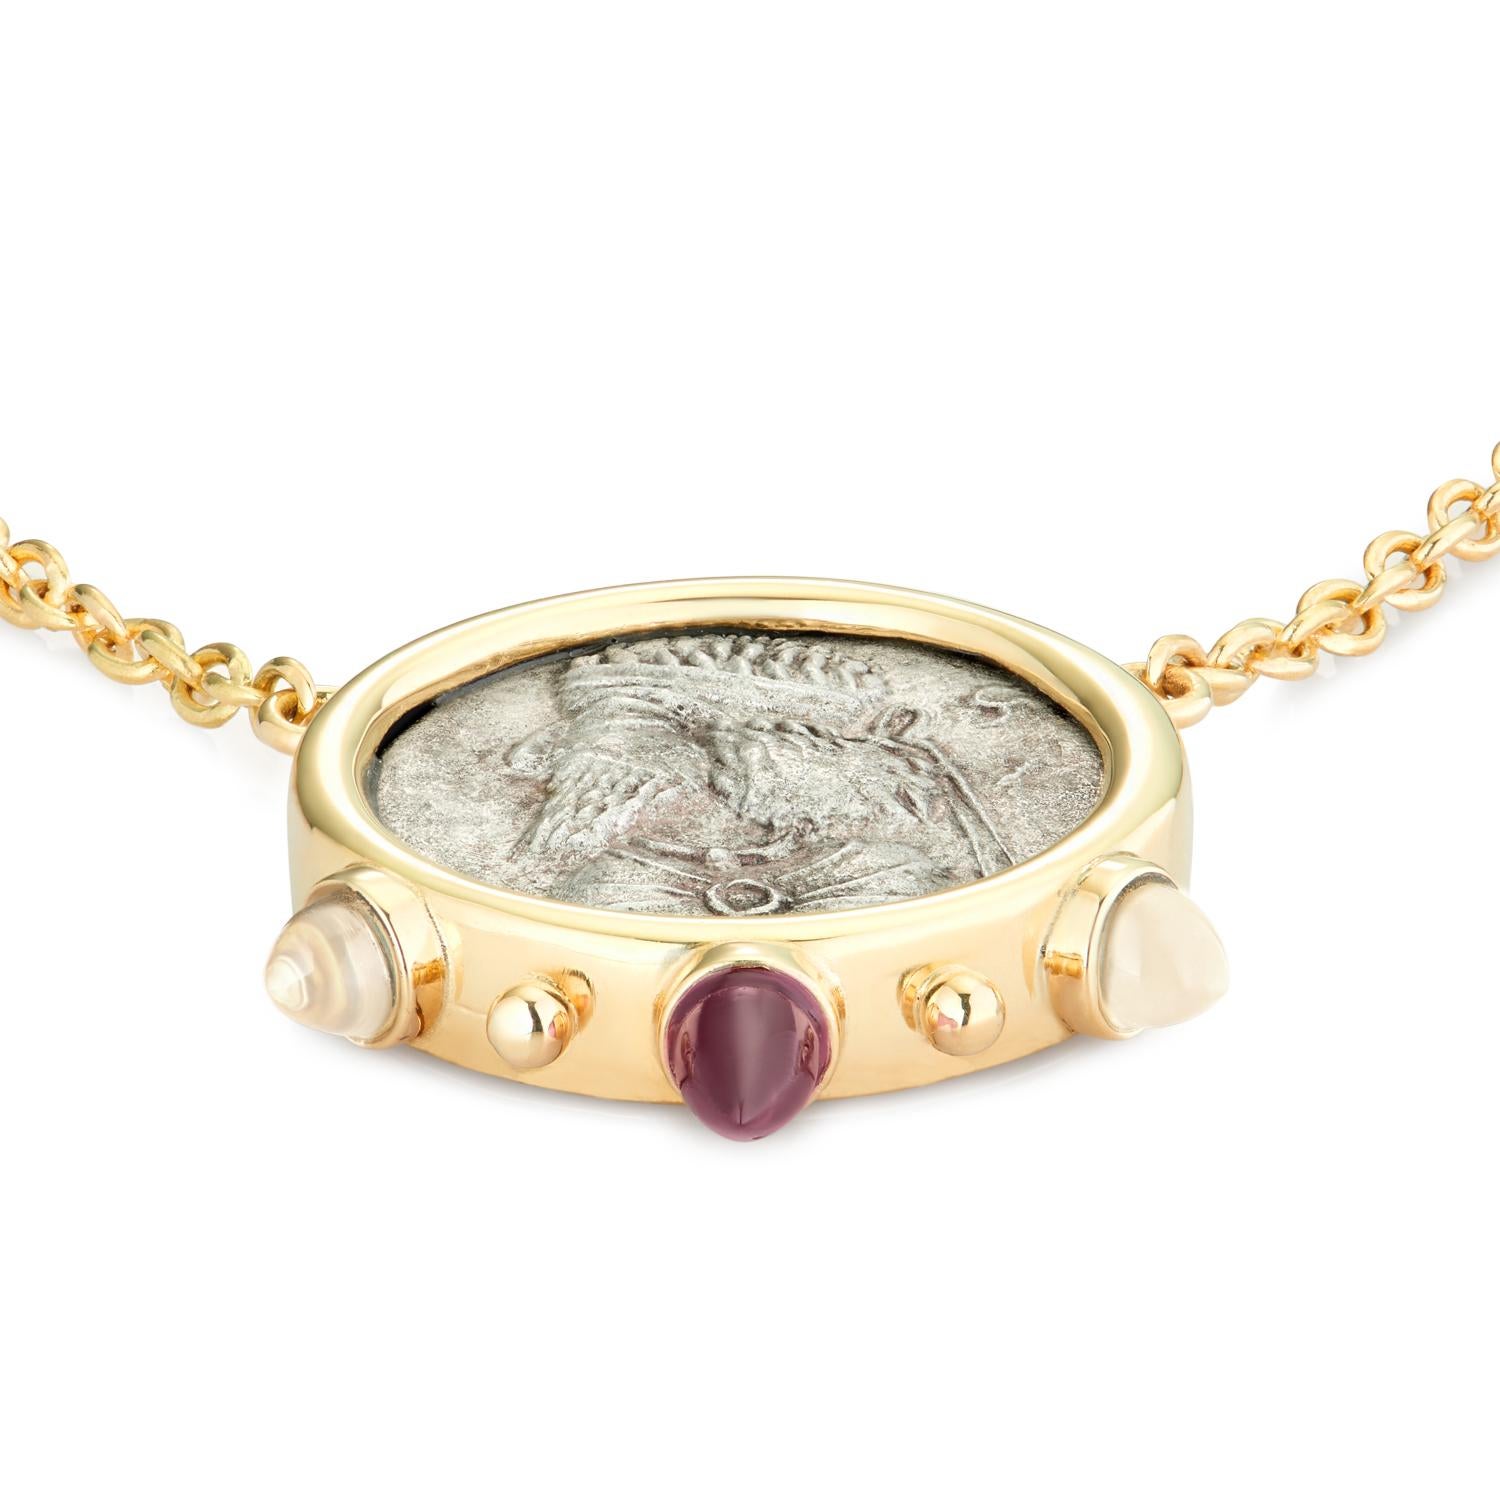 This DUBINI coin necklace from the 'Empires' collection features an authentic Persian coin minted circa 1-2 century A.D. set in 18K yellow gold with rhodolite garnet and moonstone bullet cabochons.

* Upon request each piece is provided with a